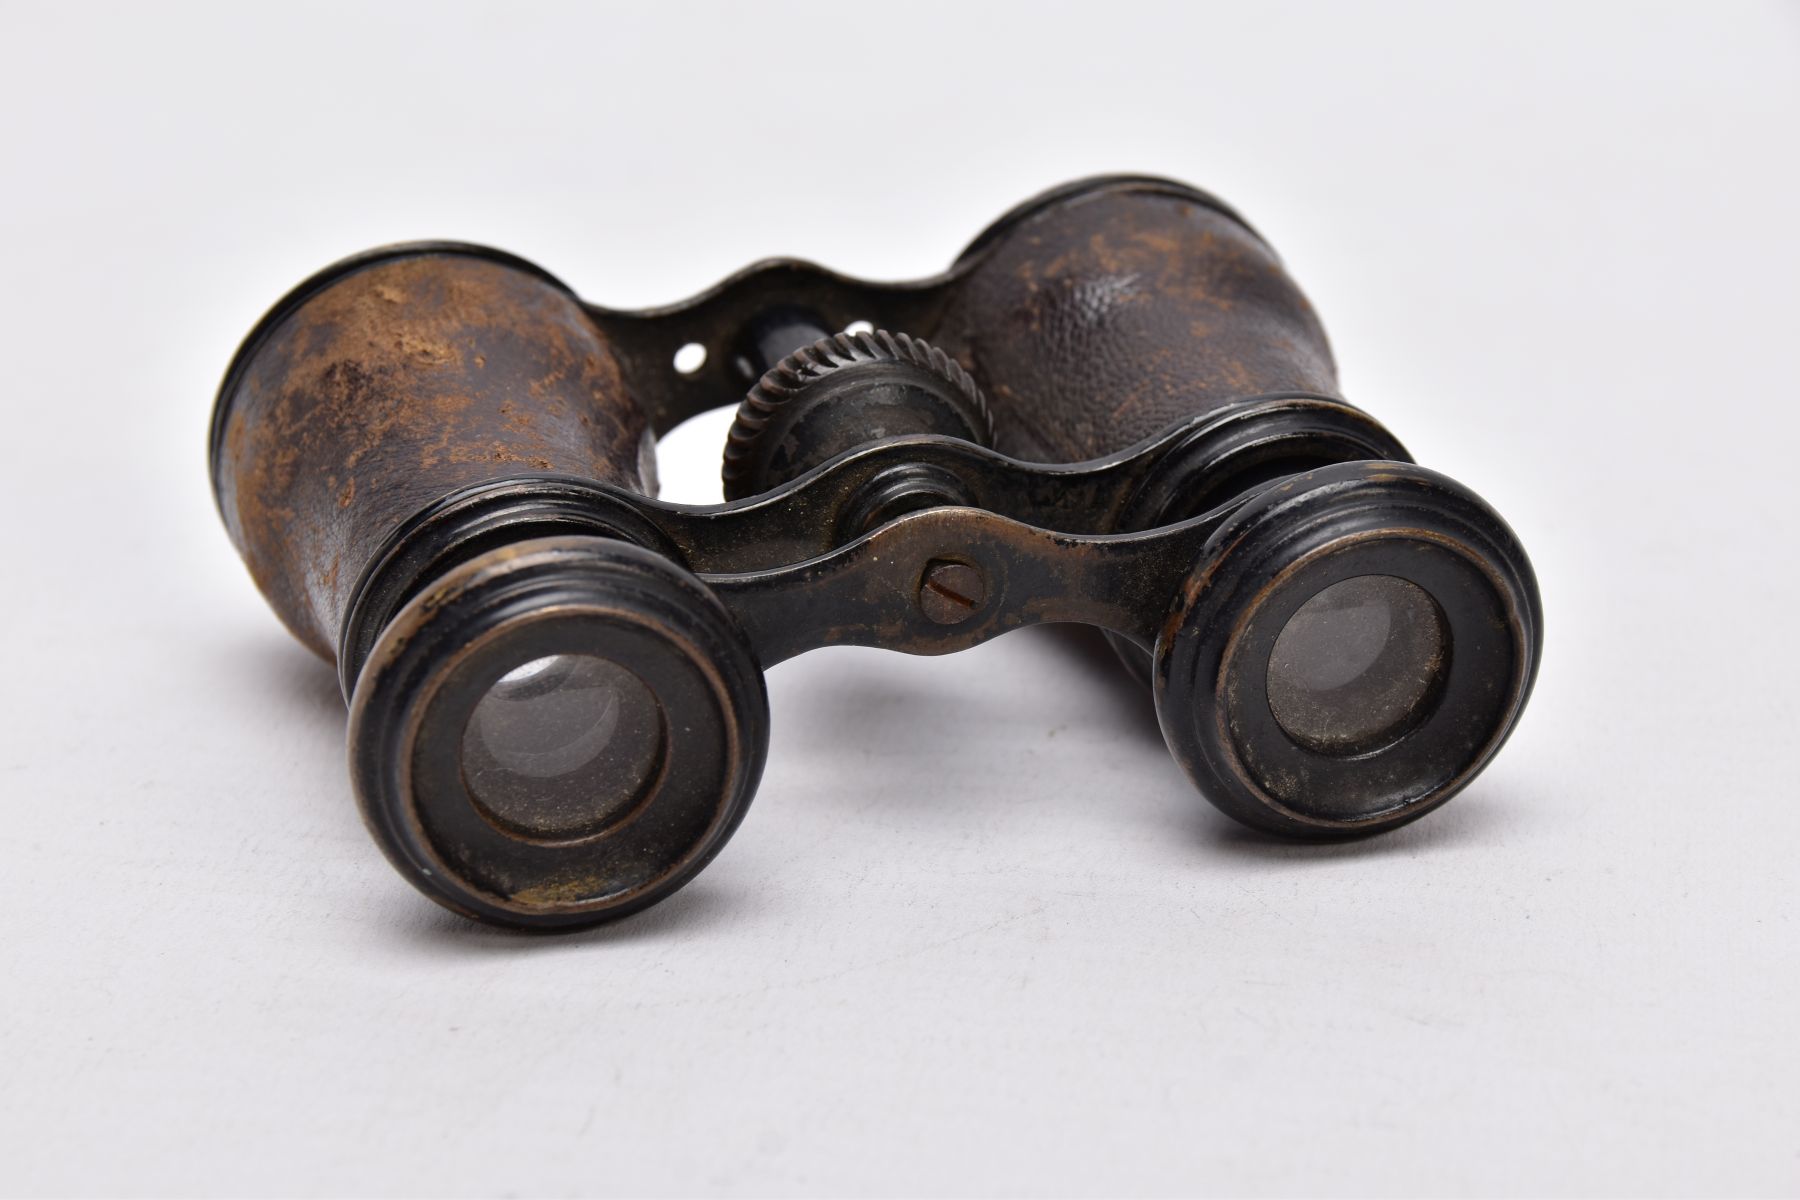 A PAIR OF EARLY 20TH CENTURY OPERA GLASSES, leather cased objective barrels, central focus wheel - Image 4 of 6